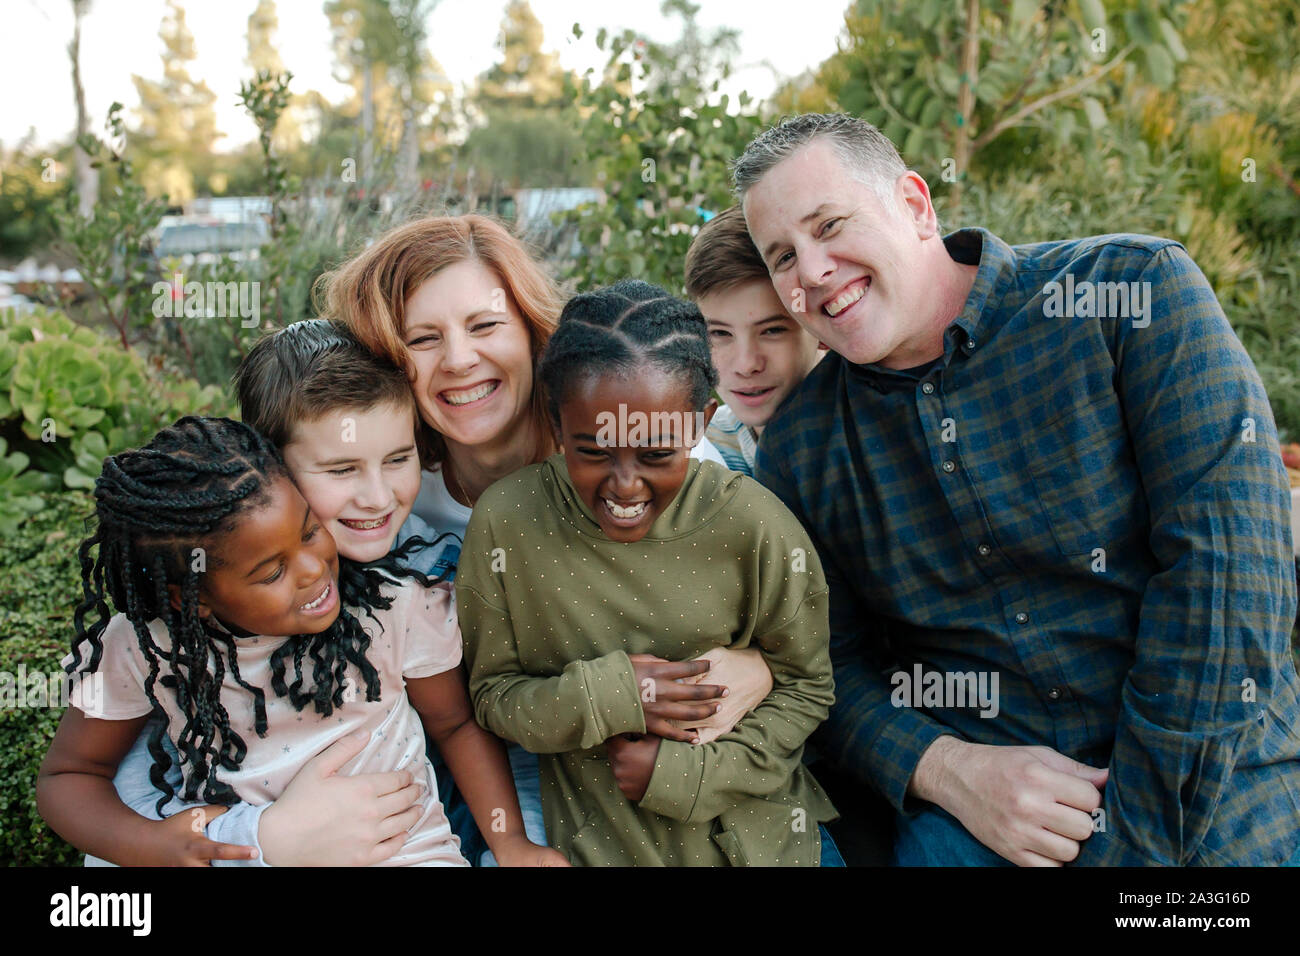 Laughing multiracial family hugging outdoors surrounded by plants Stock Photo